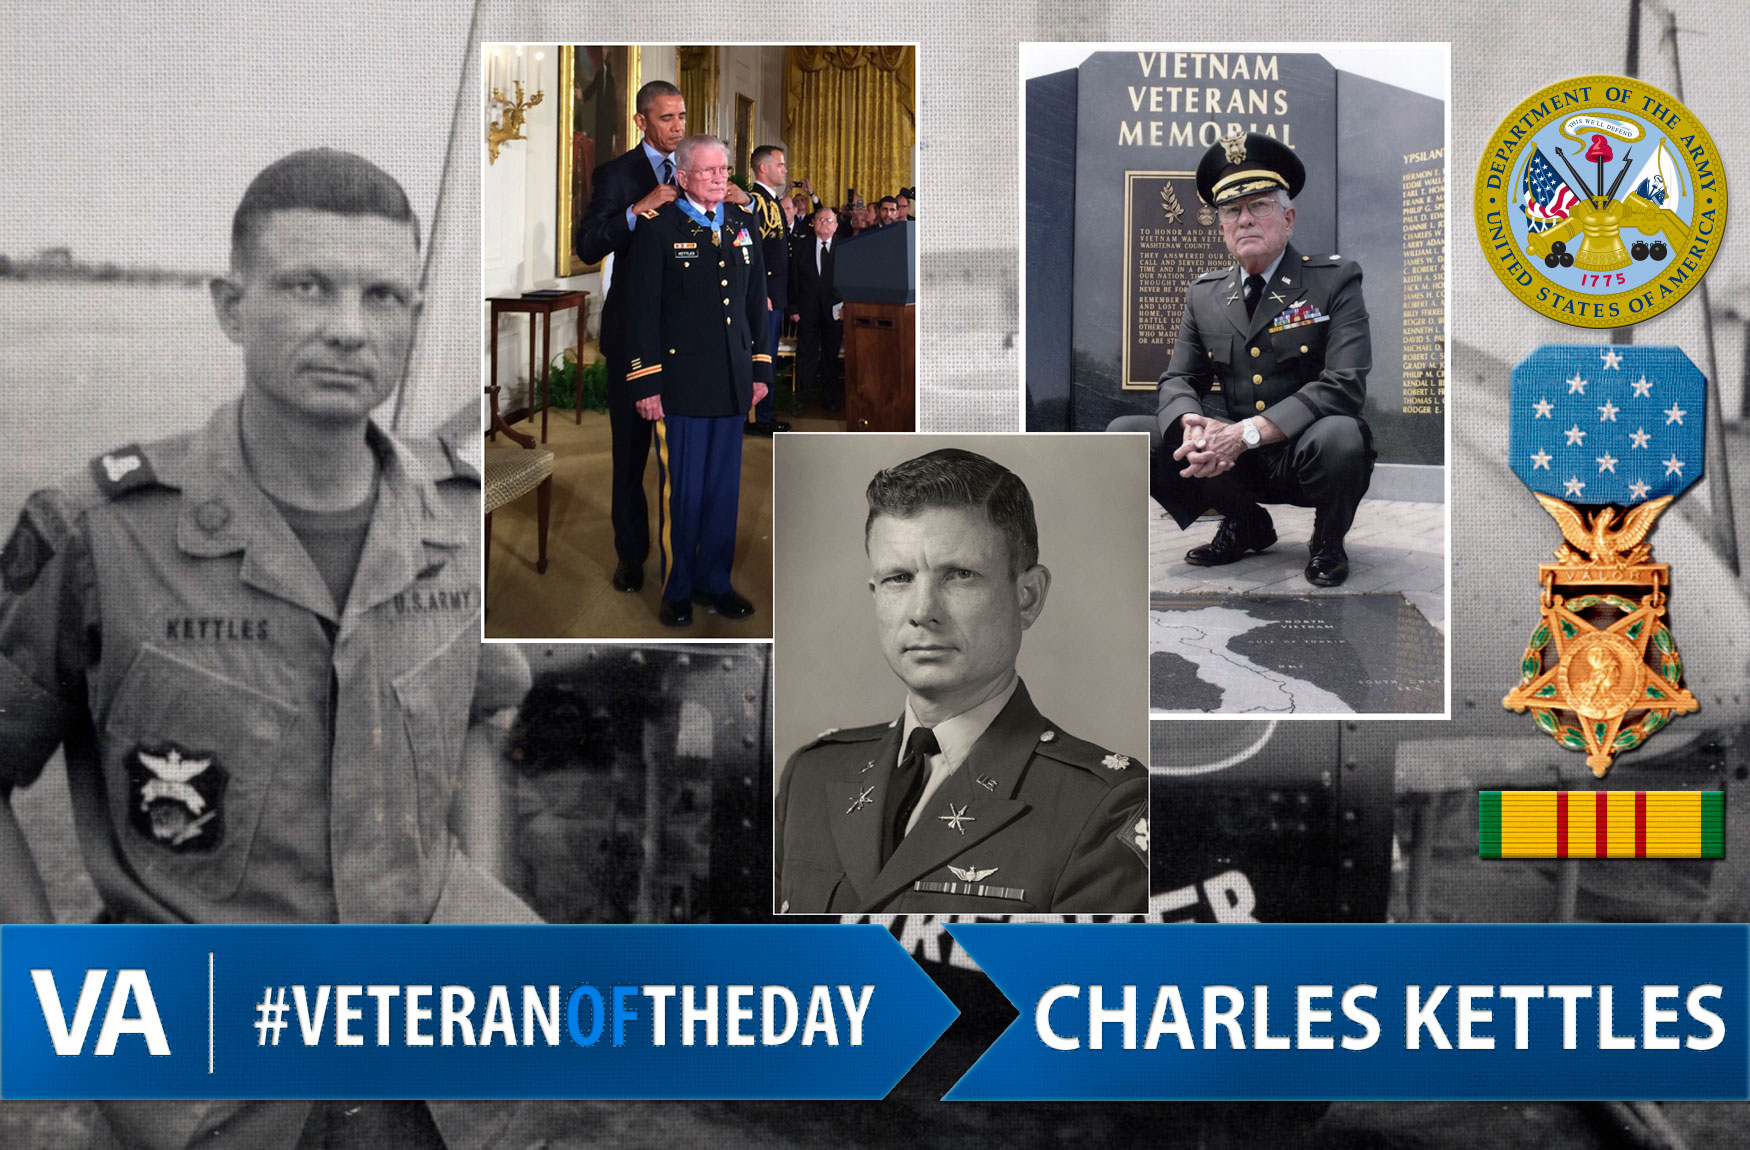 Veteran of the day Charles Kettles